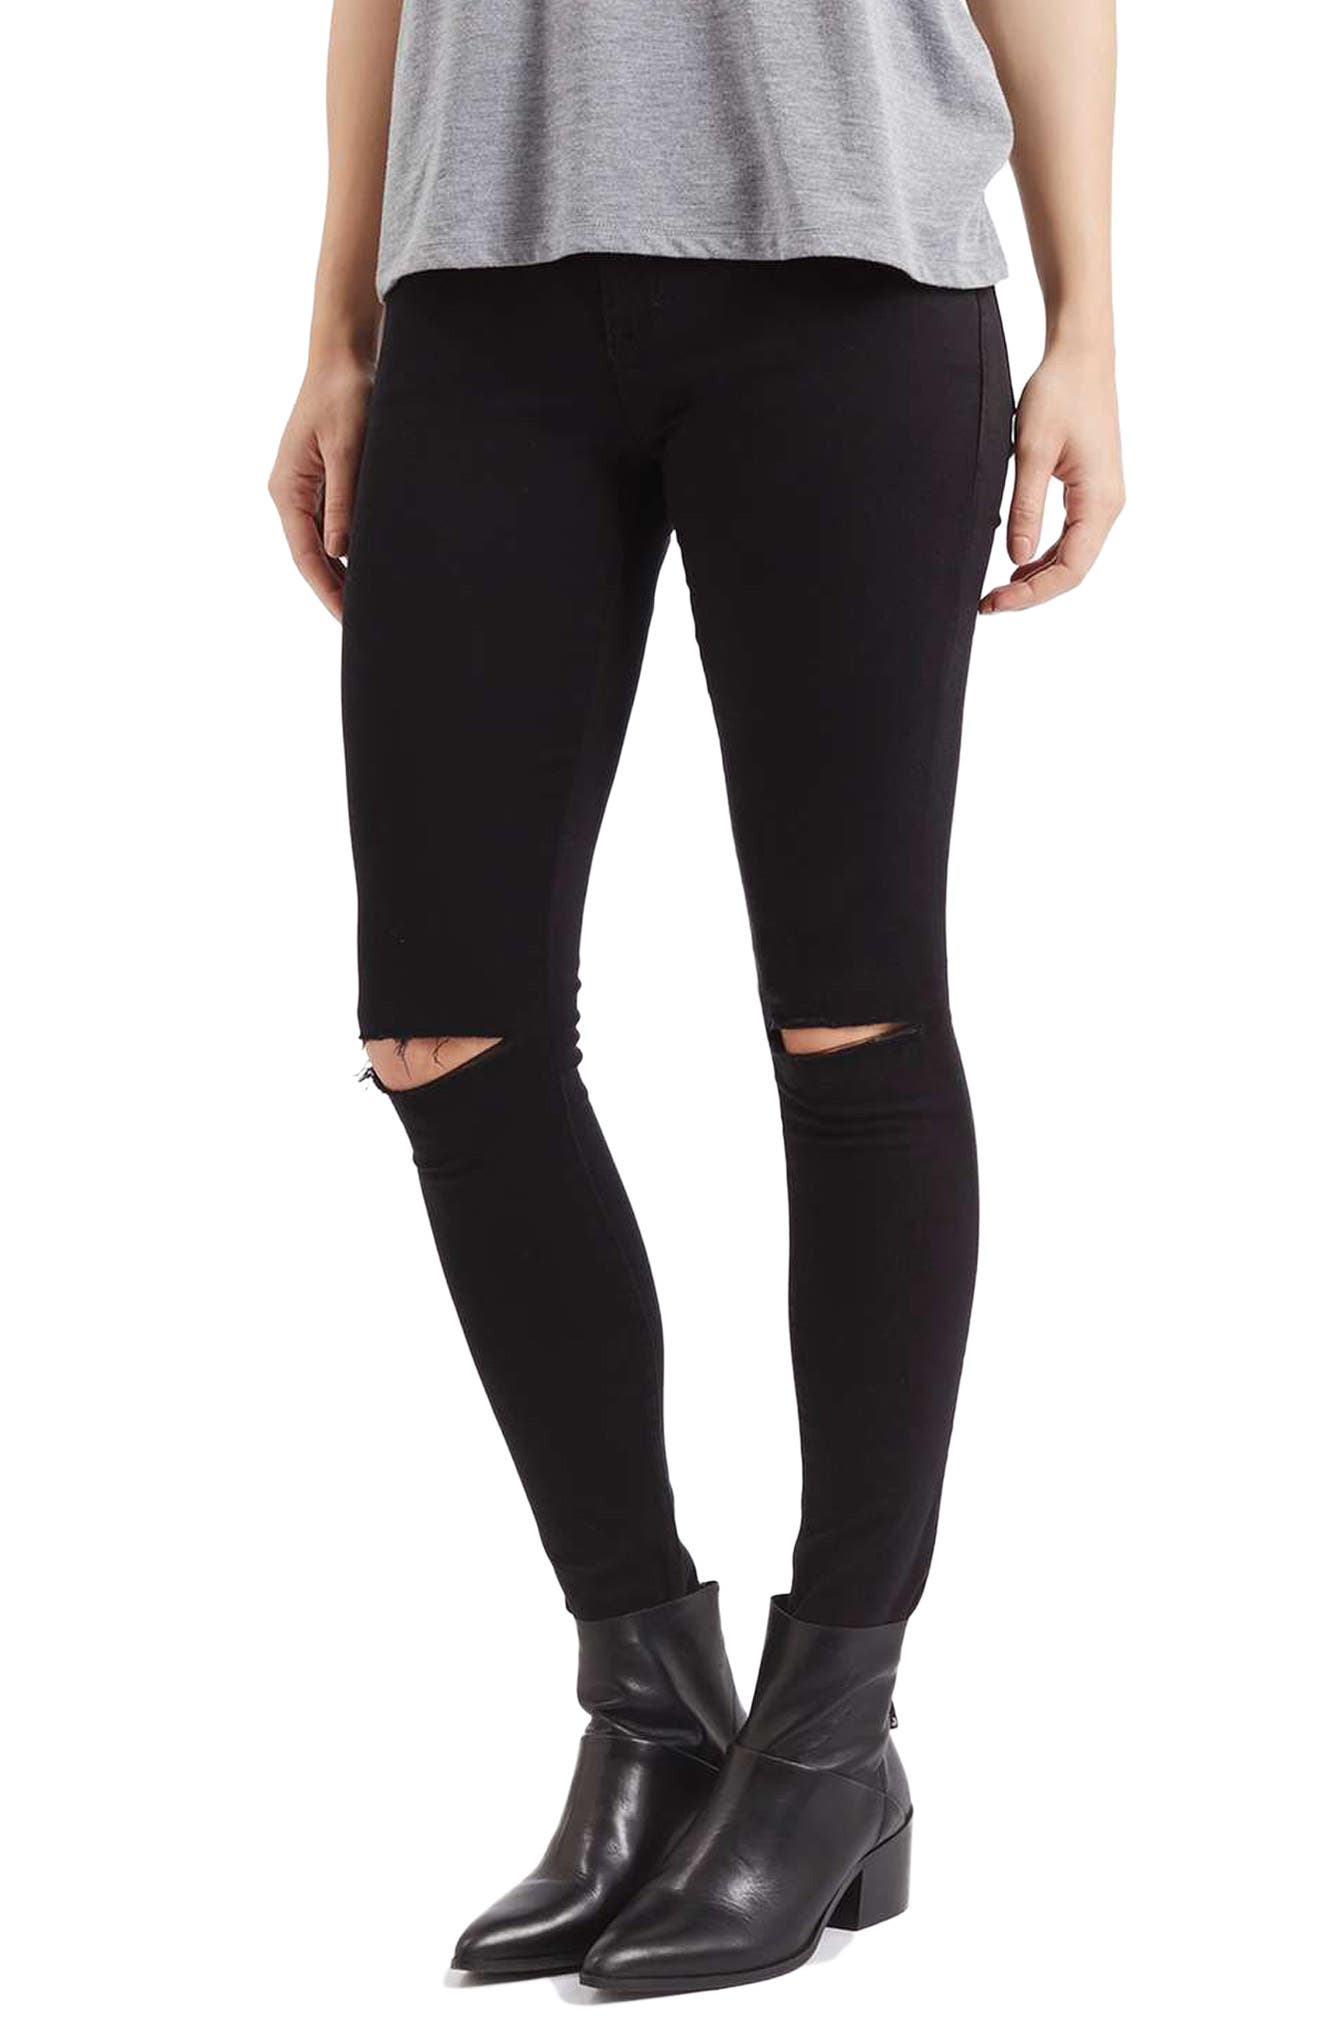 topshop leigh ripped jeans